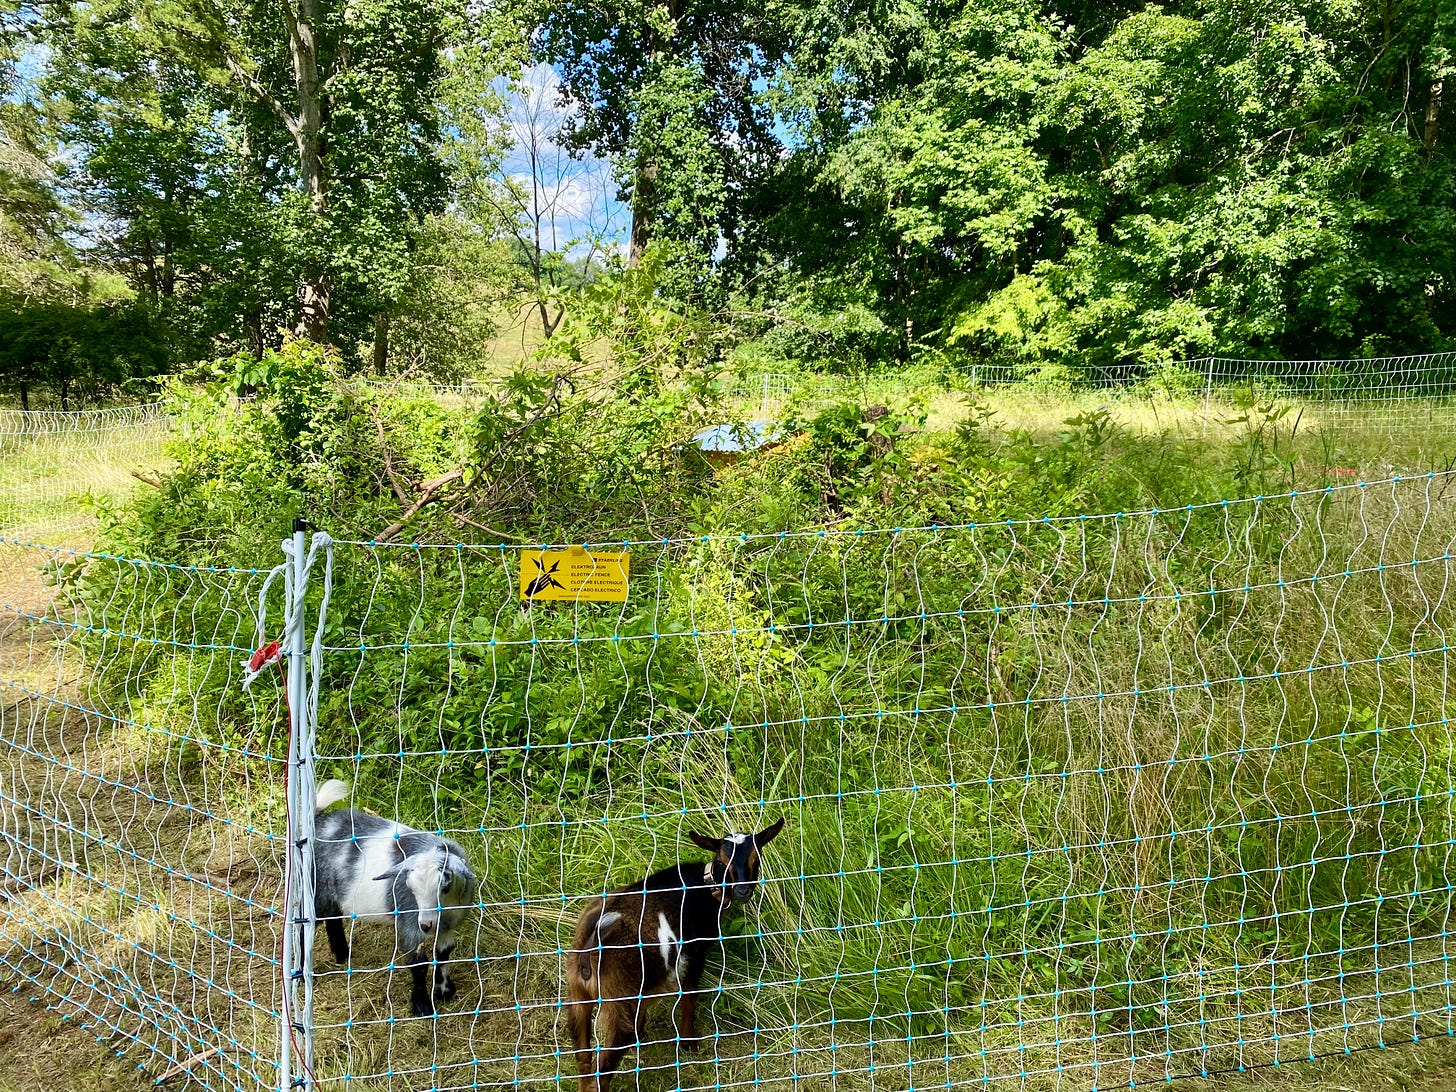 Two goats fenced into an overgrown area